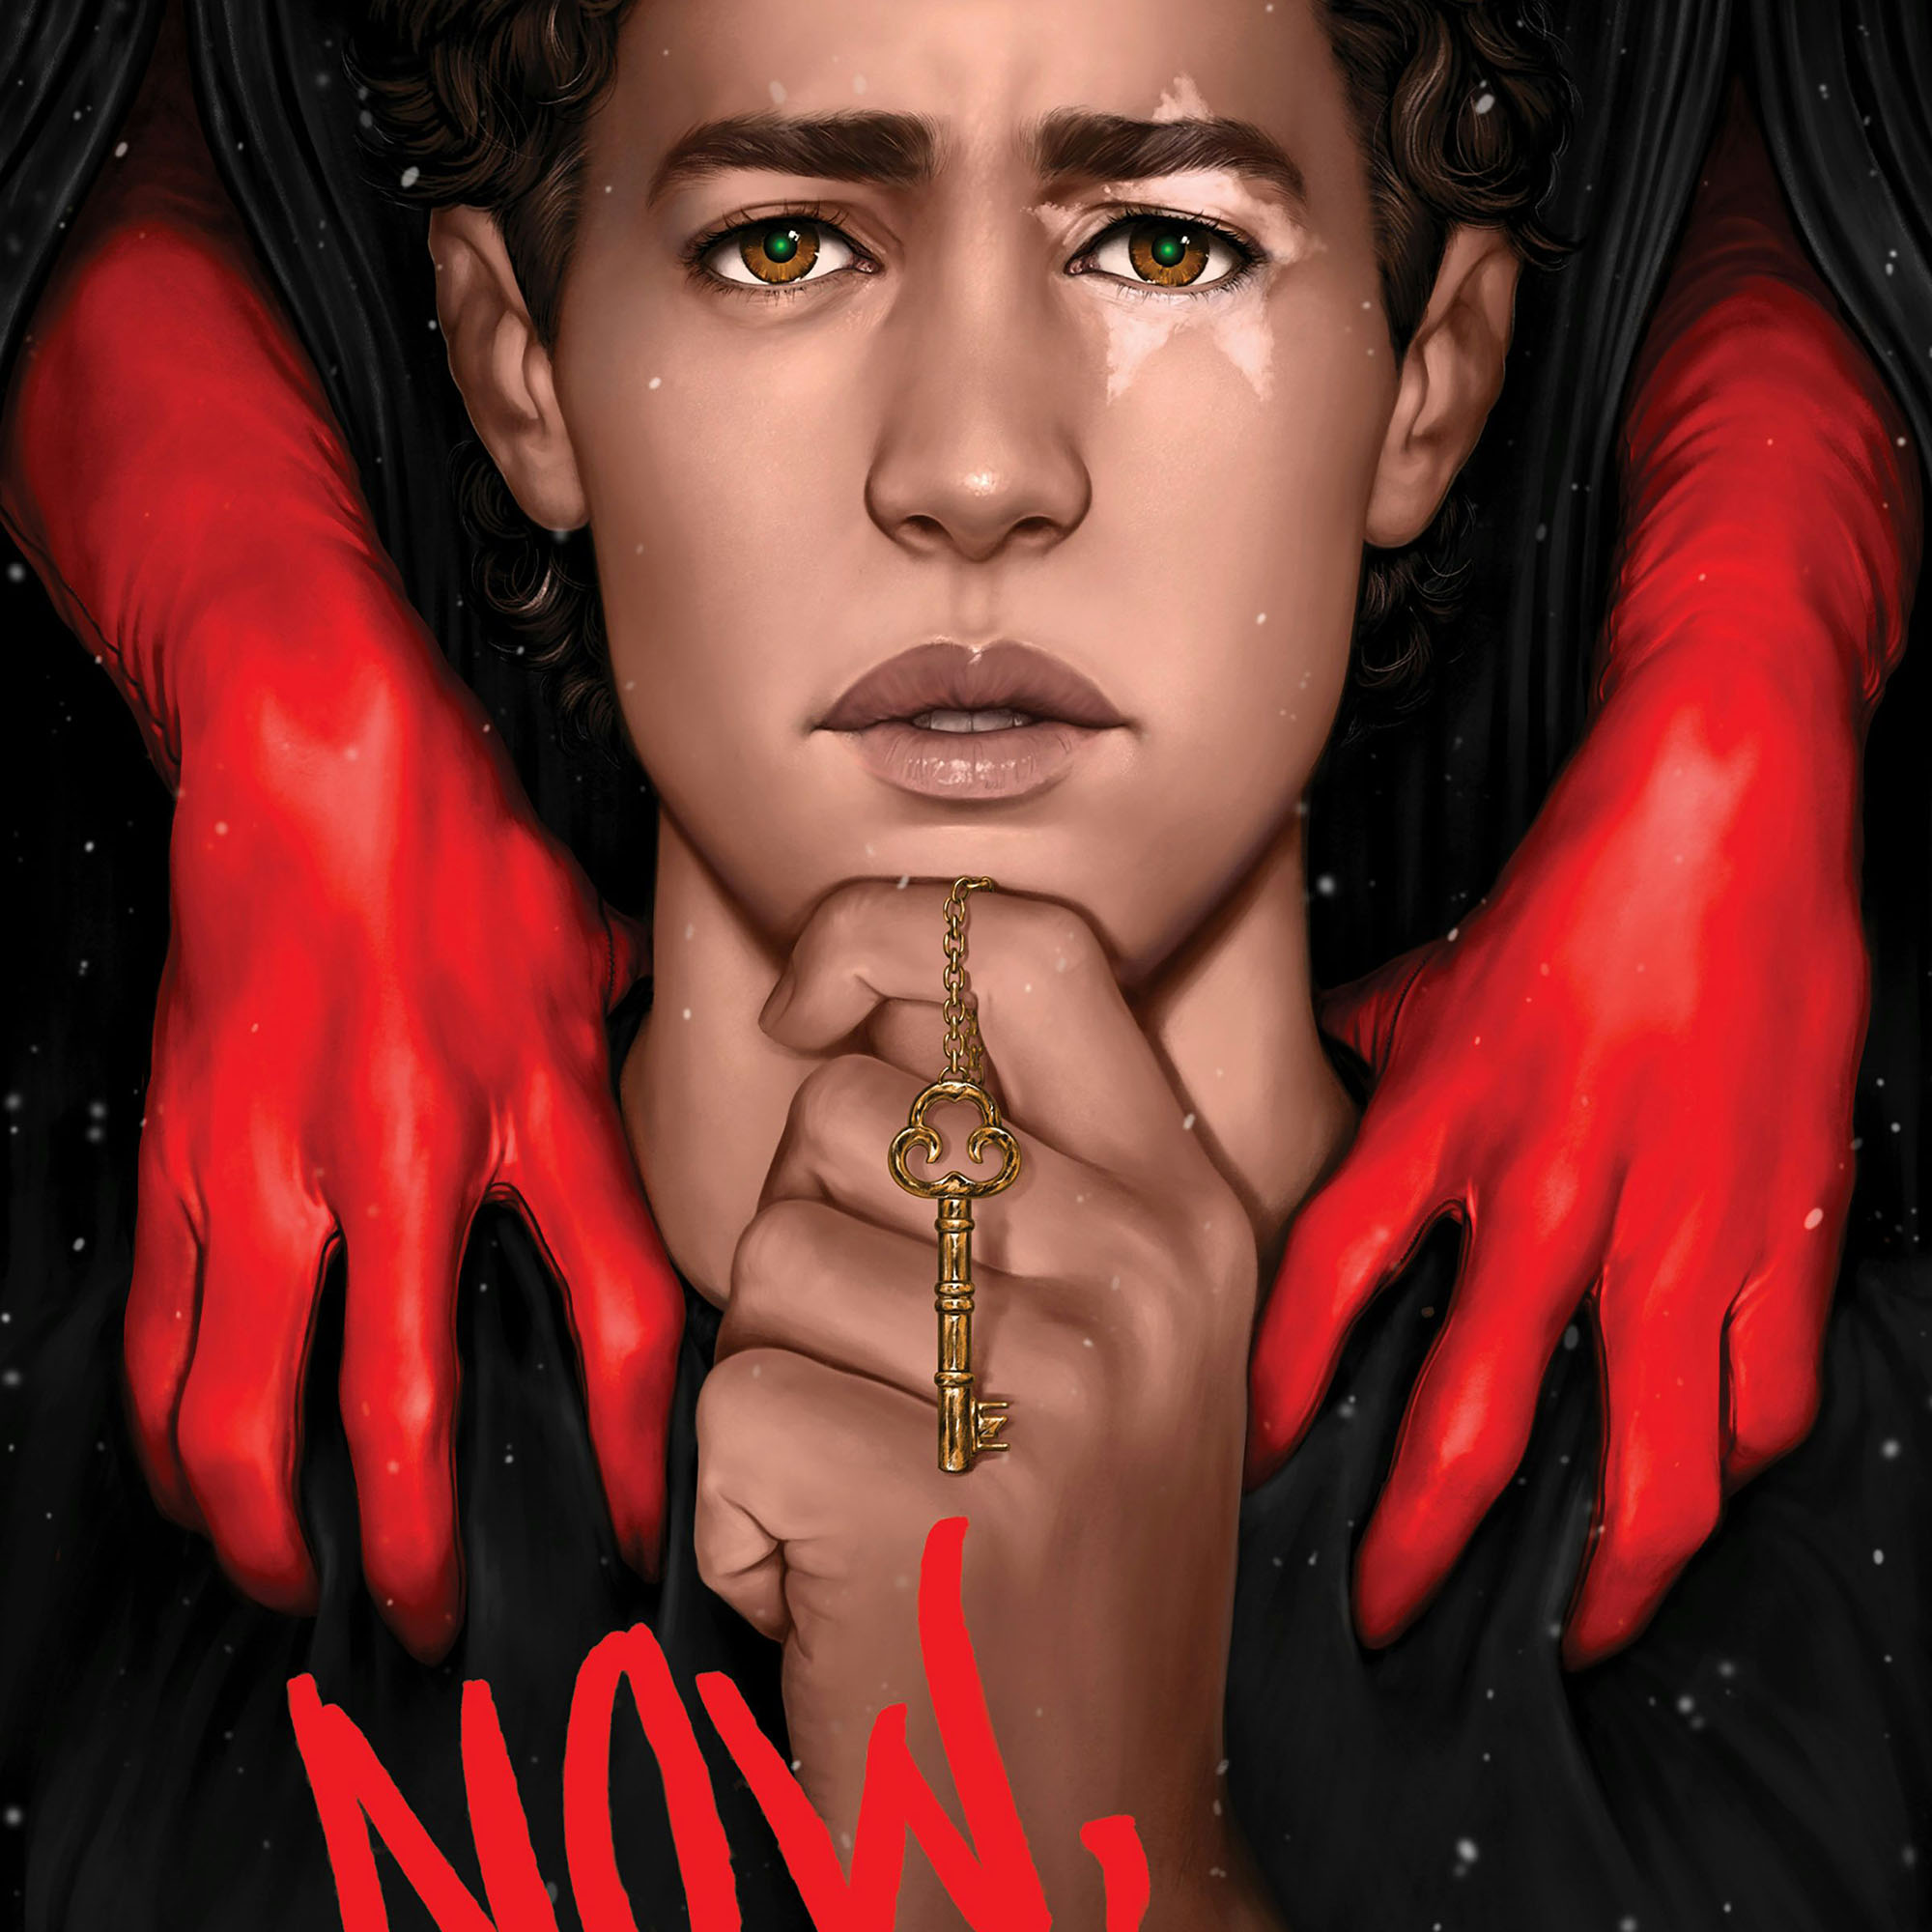 Photo: The cover of the book "Now, Conjurers" by Freddie Kölsch. It features an illustration of a boy with brown eyes and green pupils and white star mark over his left eye. He is clutching a key on a chain to his mouth while hands in red gloves reach towards him